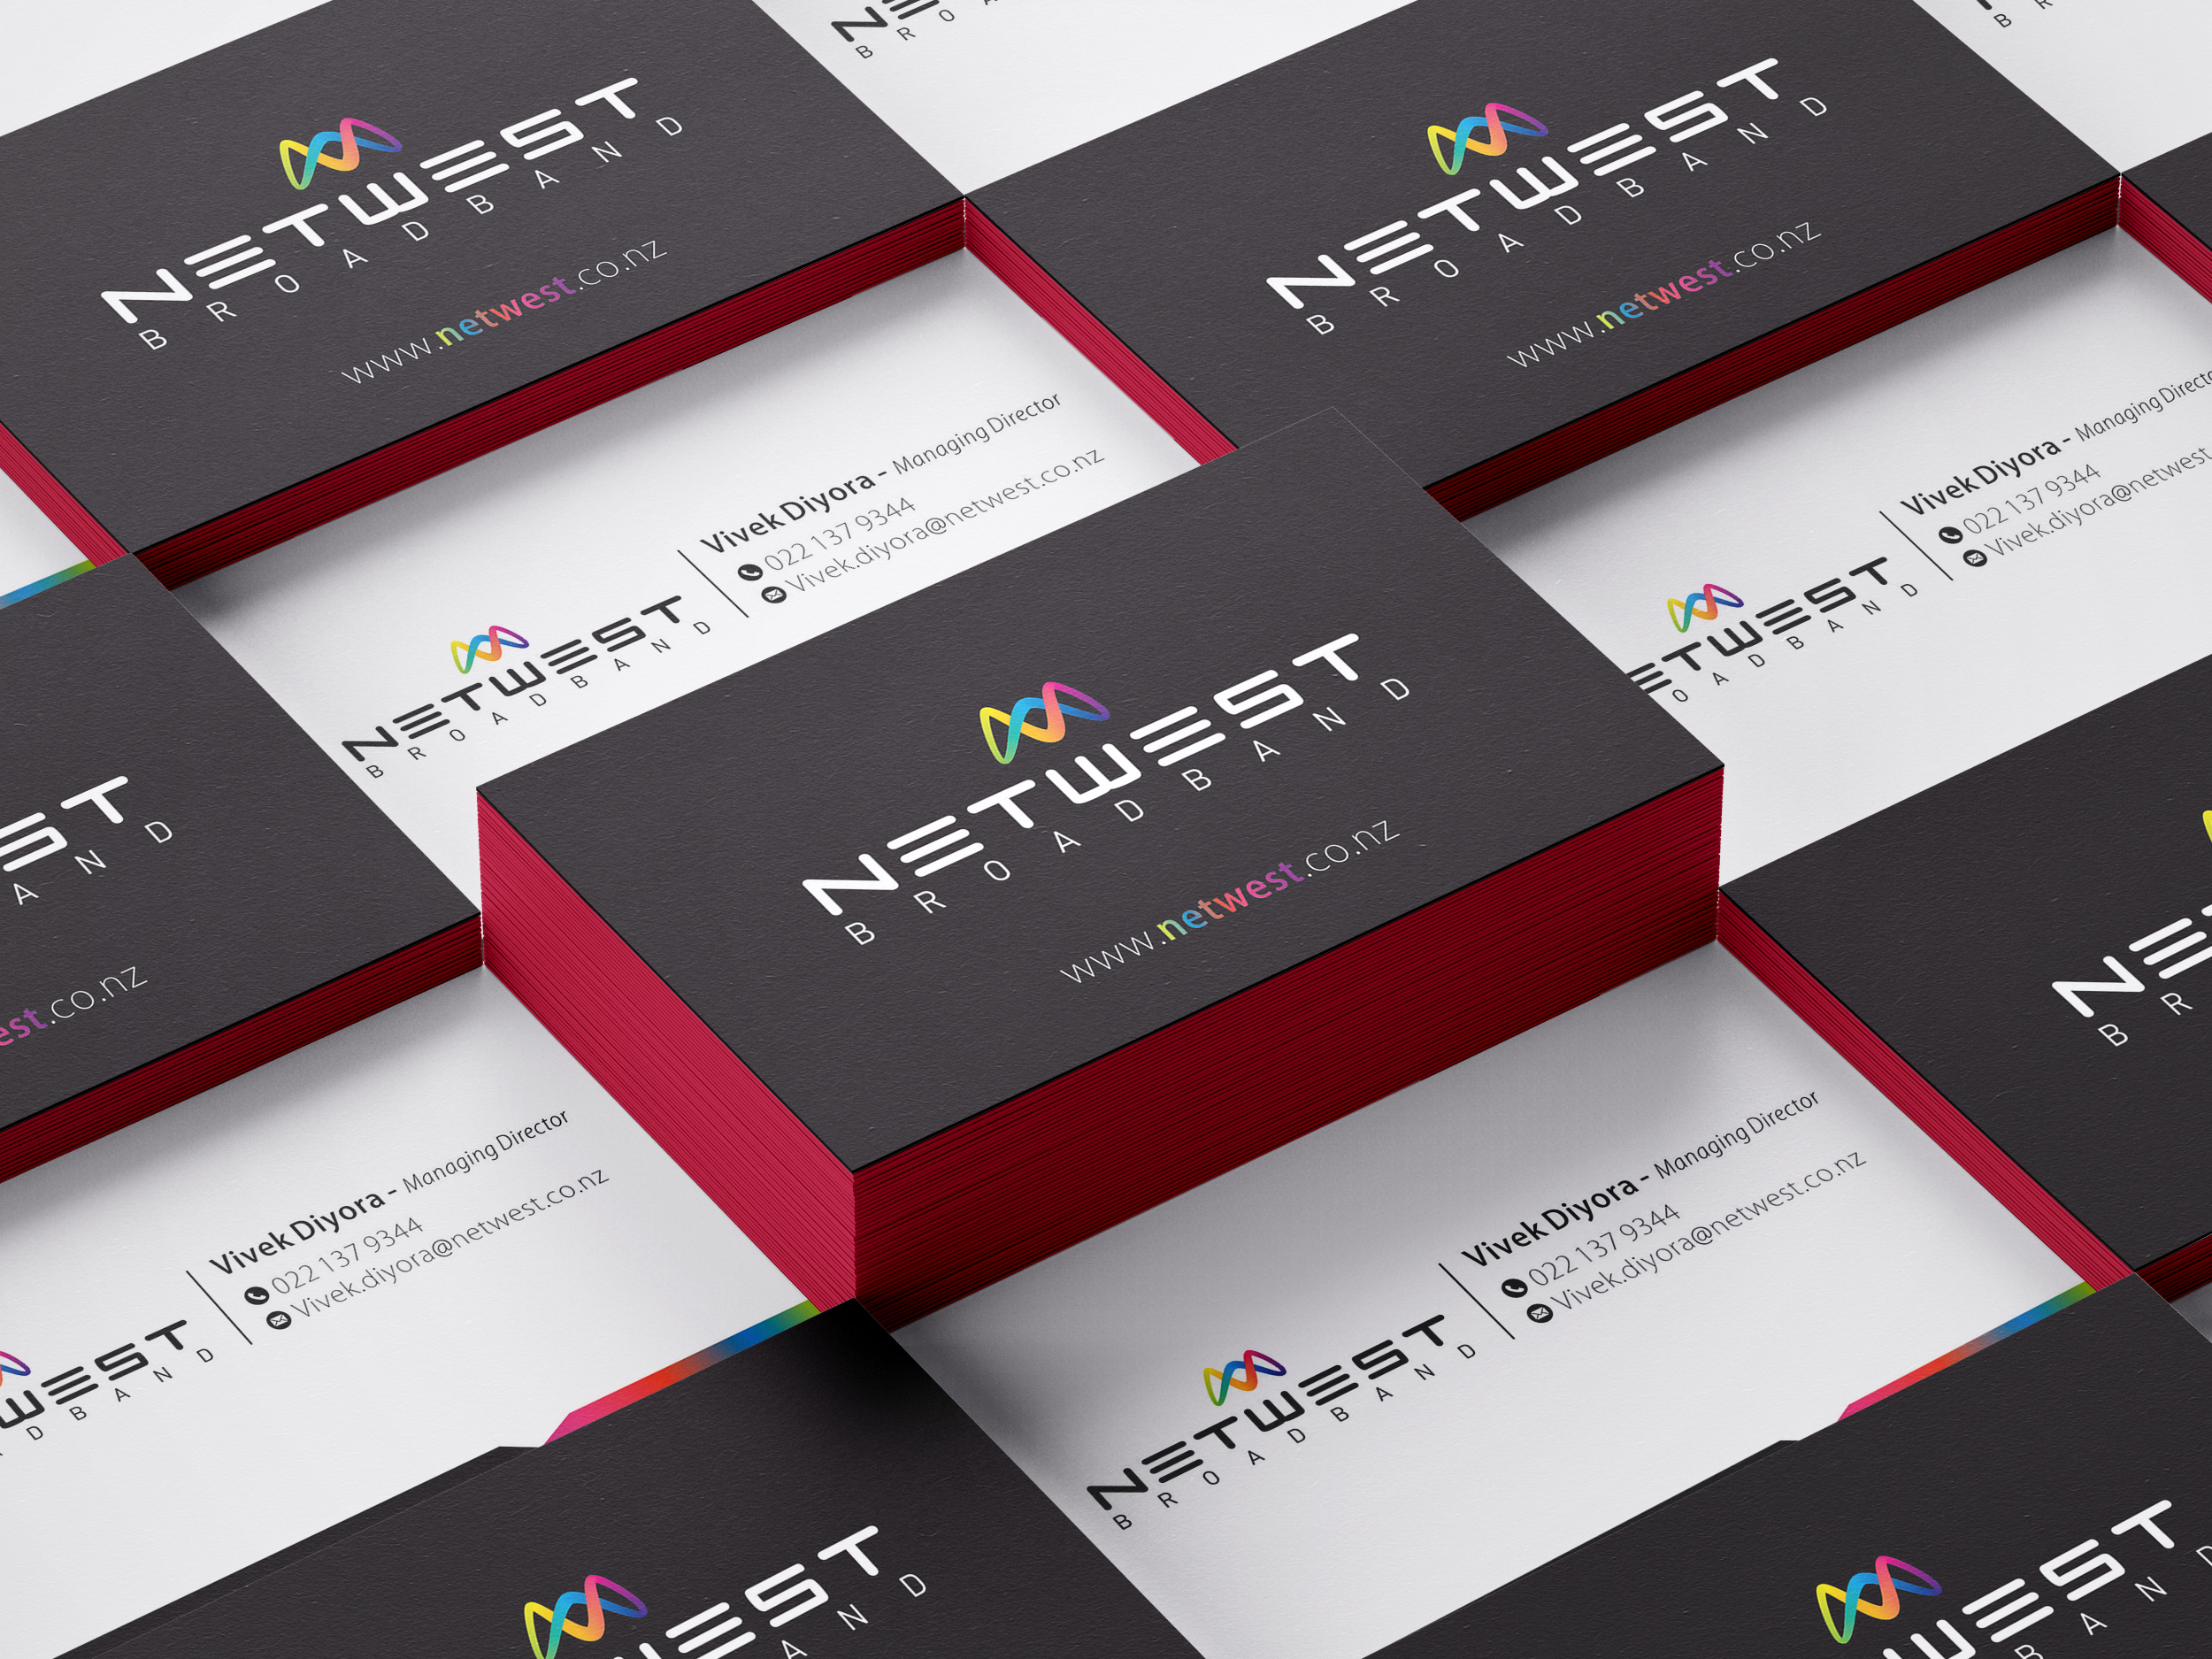 Netwest